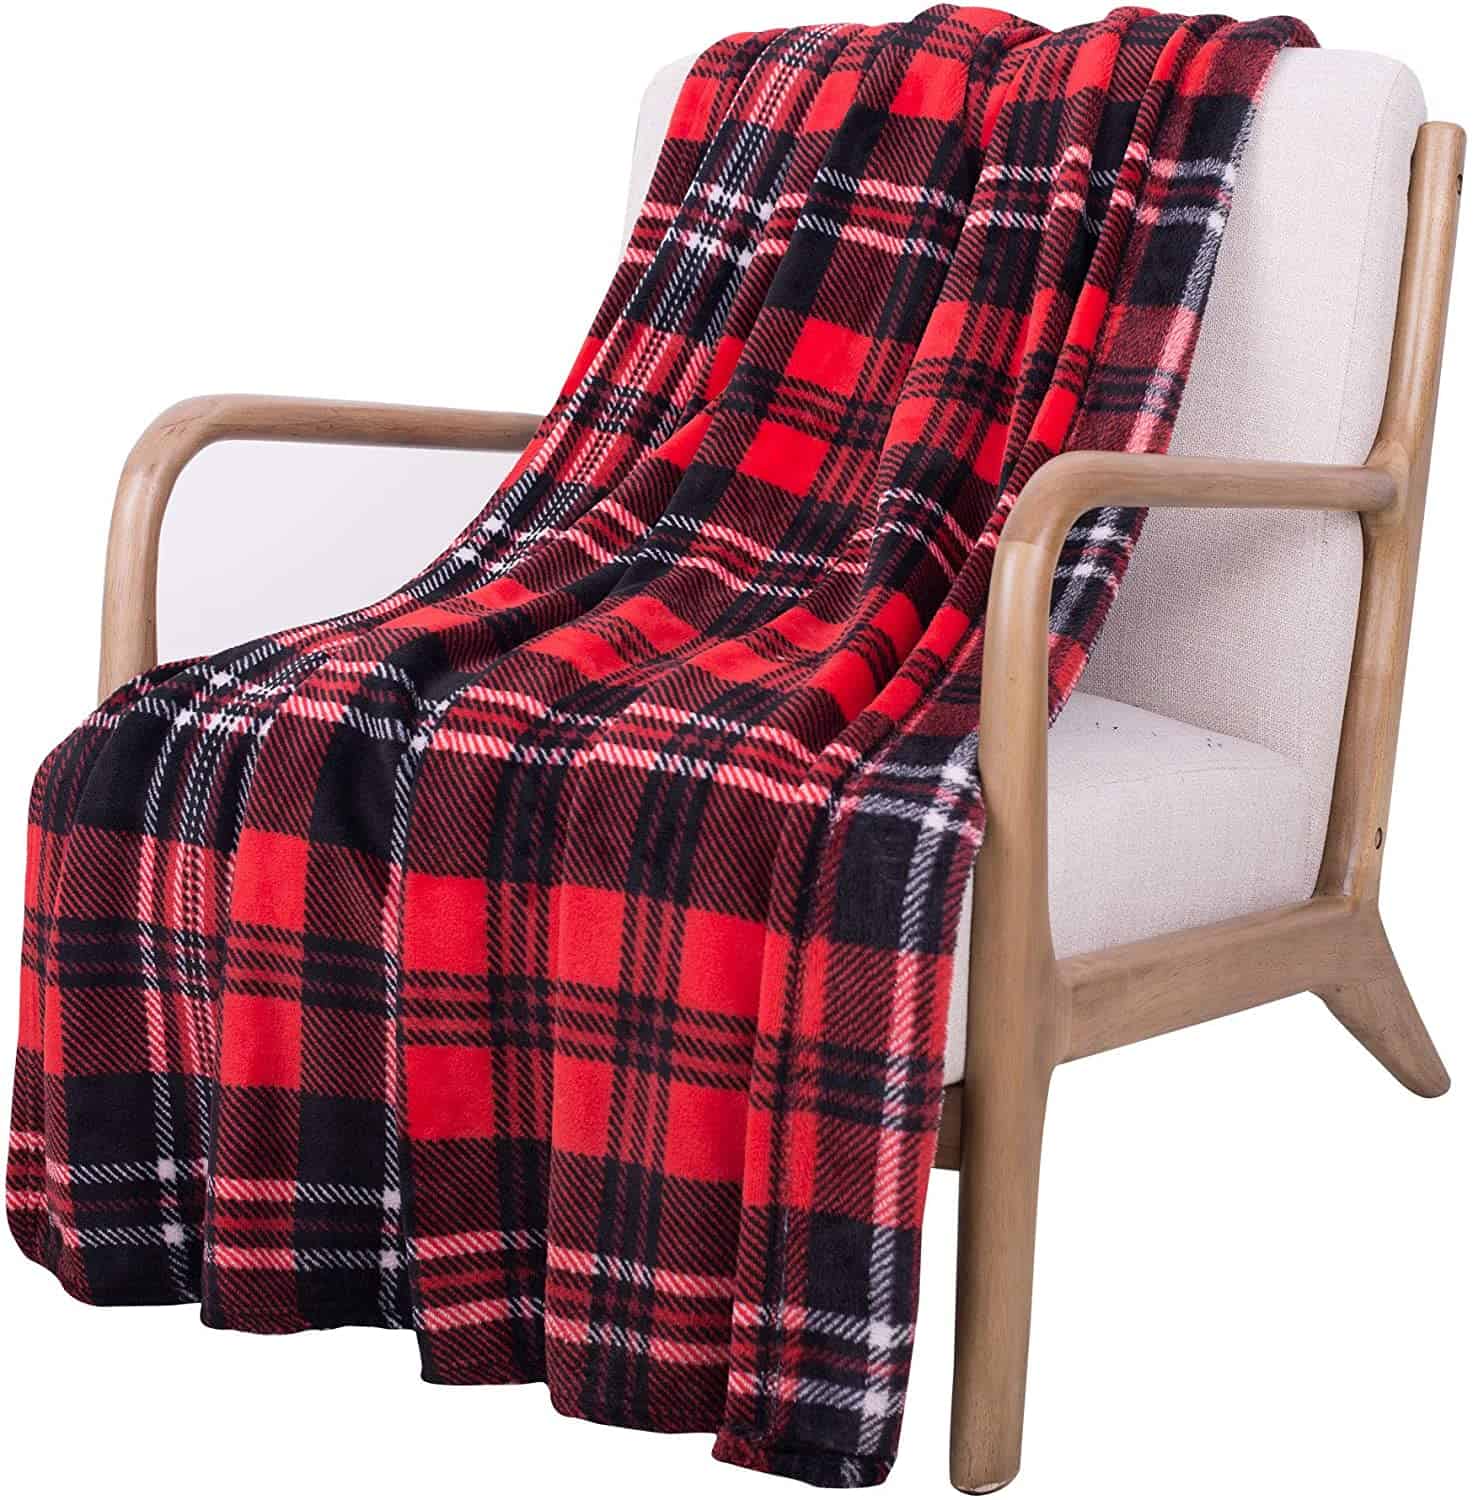 A warm blanket is perfect for nippy evenings.